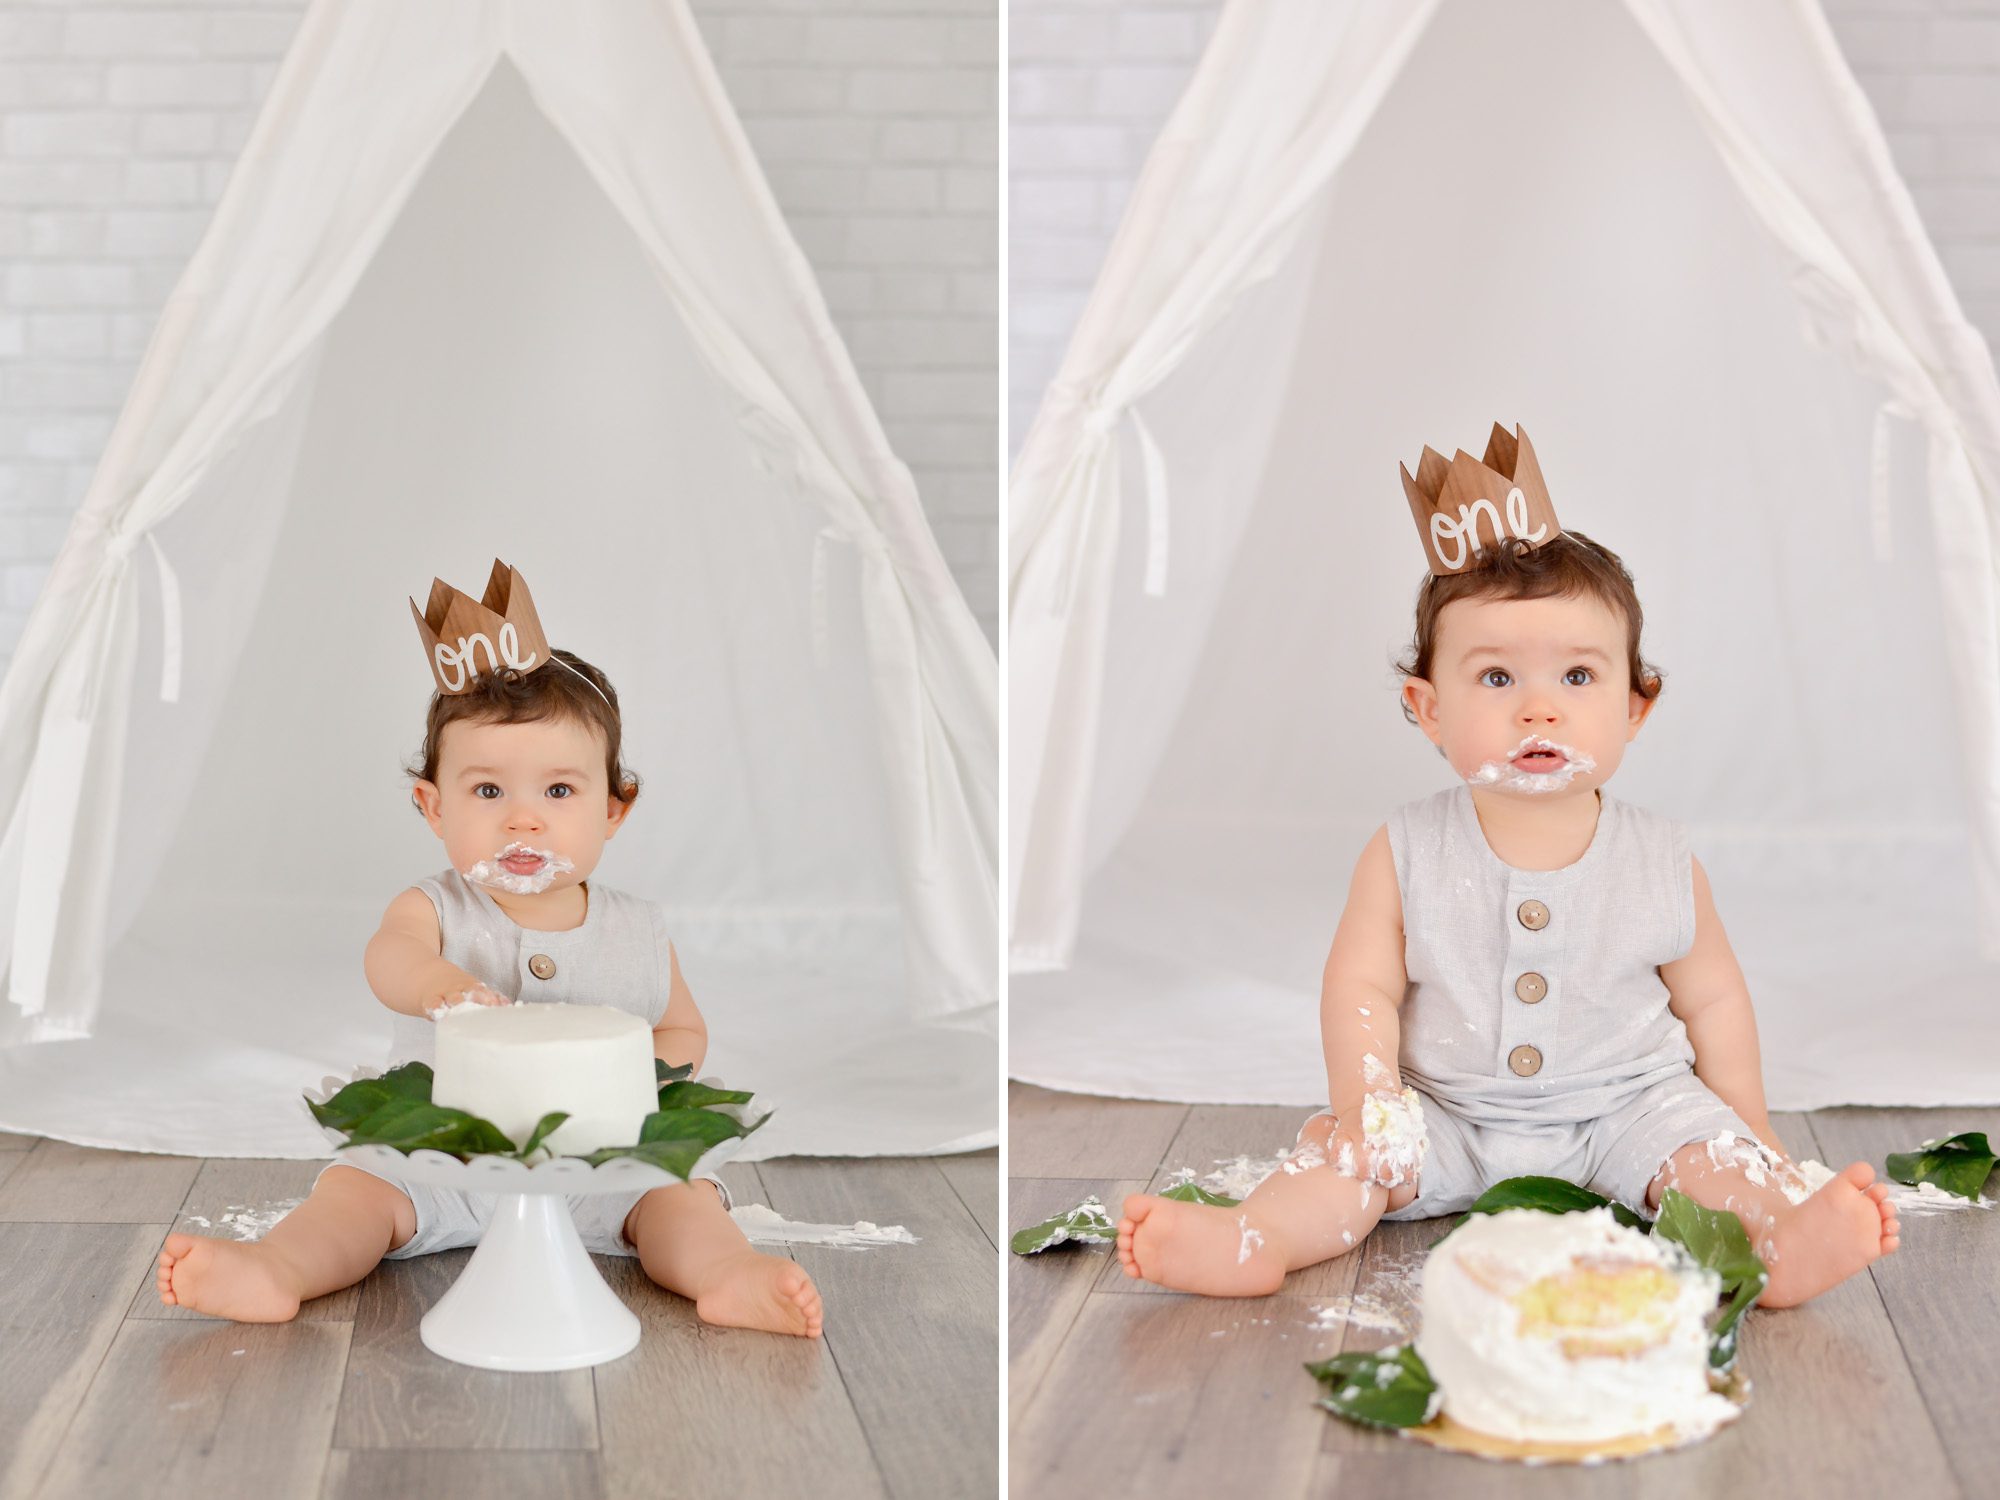 One year old baby boy with dark curls smashes white cake for his first birthday